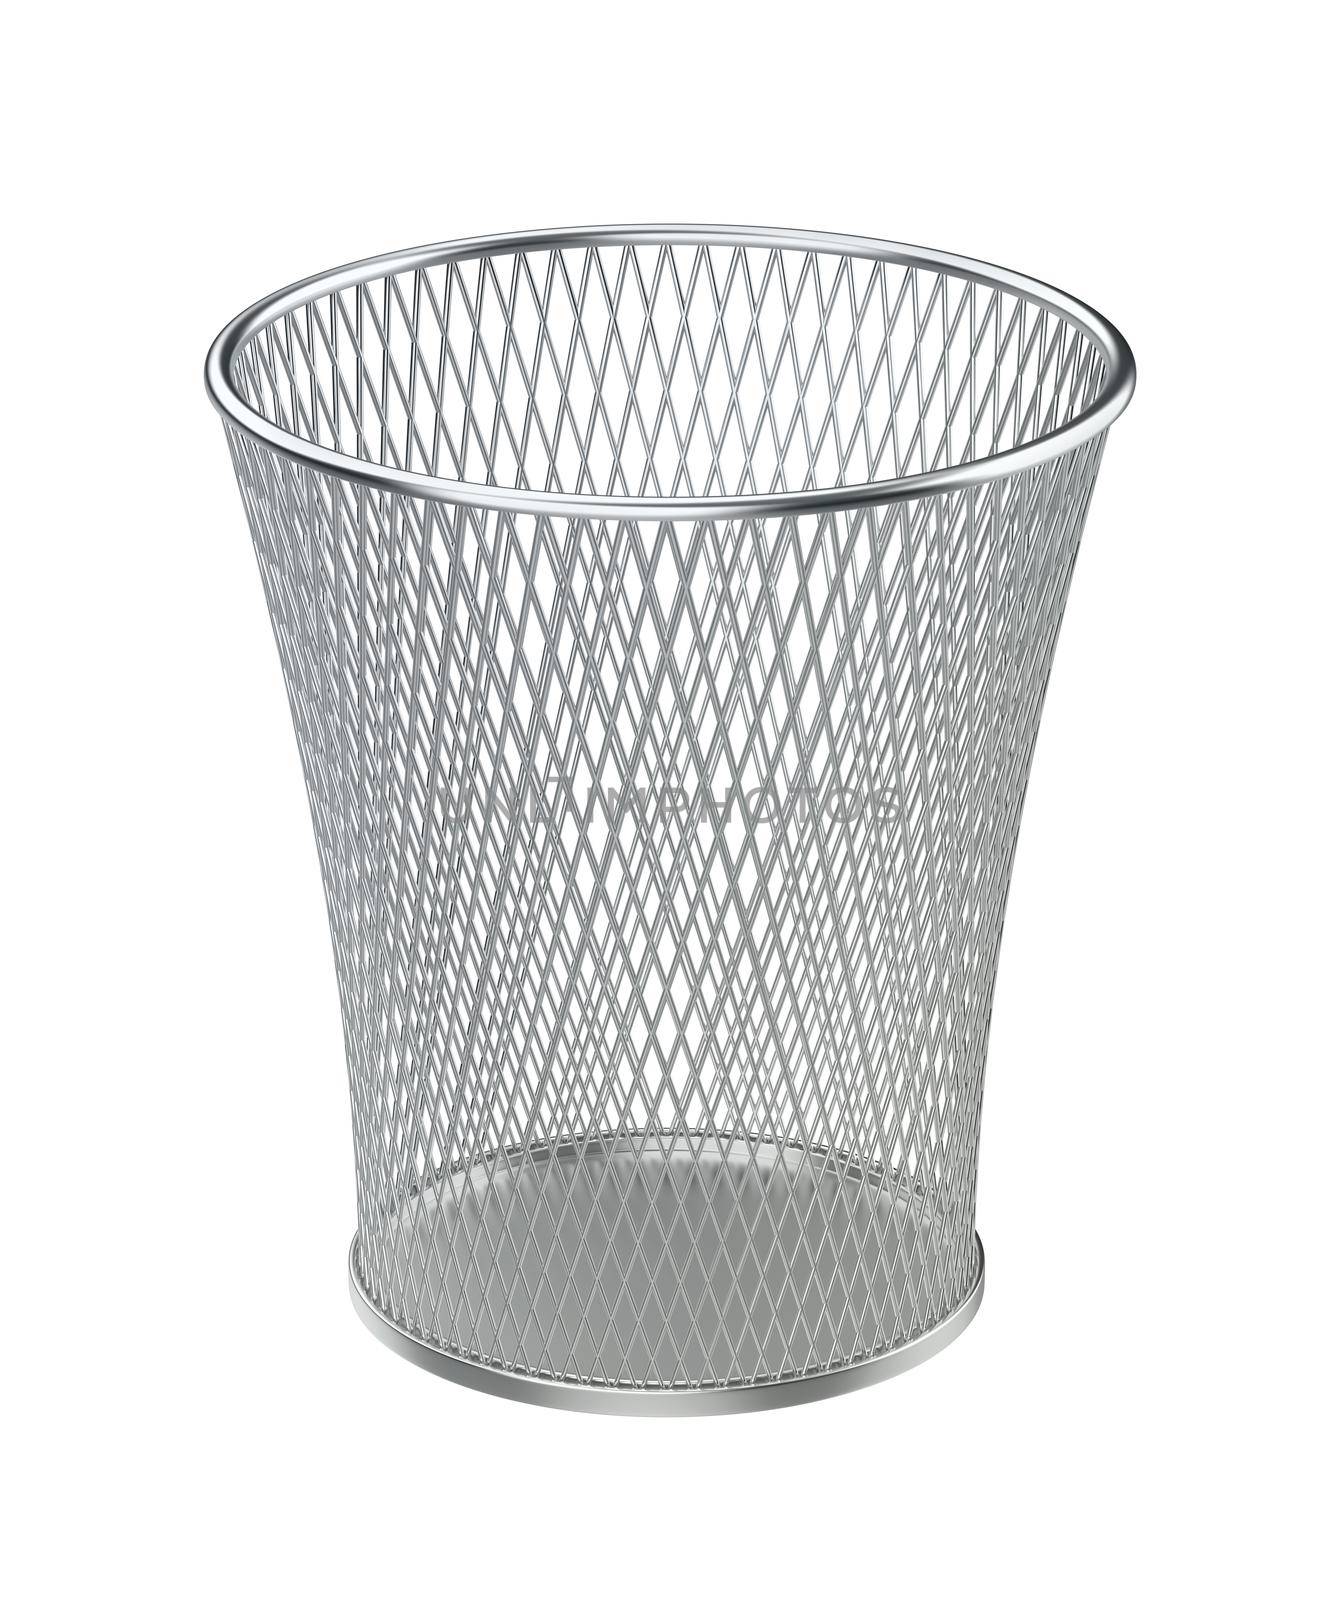 Silver wastepaper basket isolated on white background